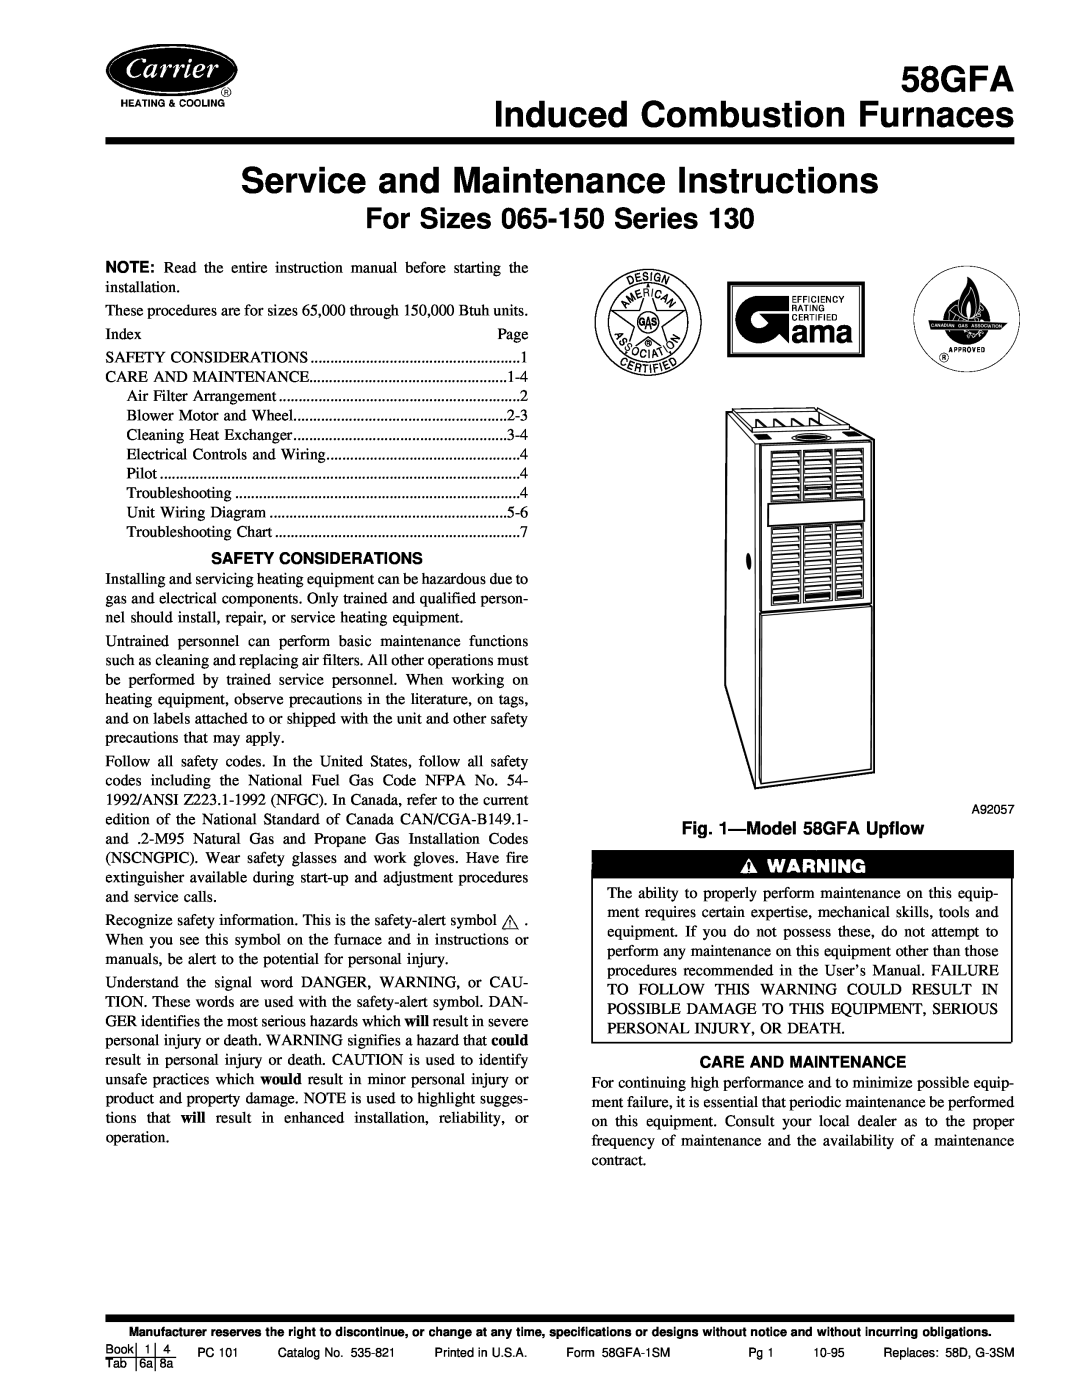 Carrier instruction manual Service and Maintenance Instructions, 58GFA Induced Combustion Furnaces, ÐModel 58GFA Upflow 